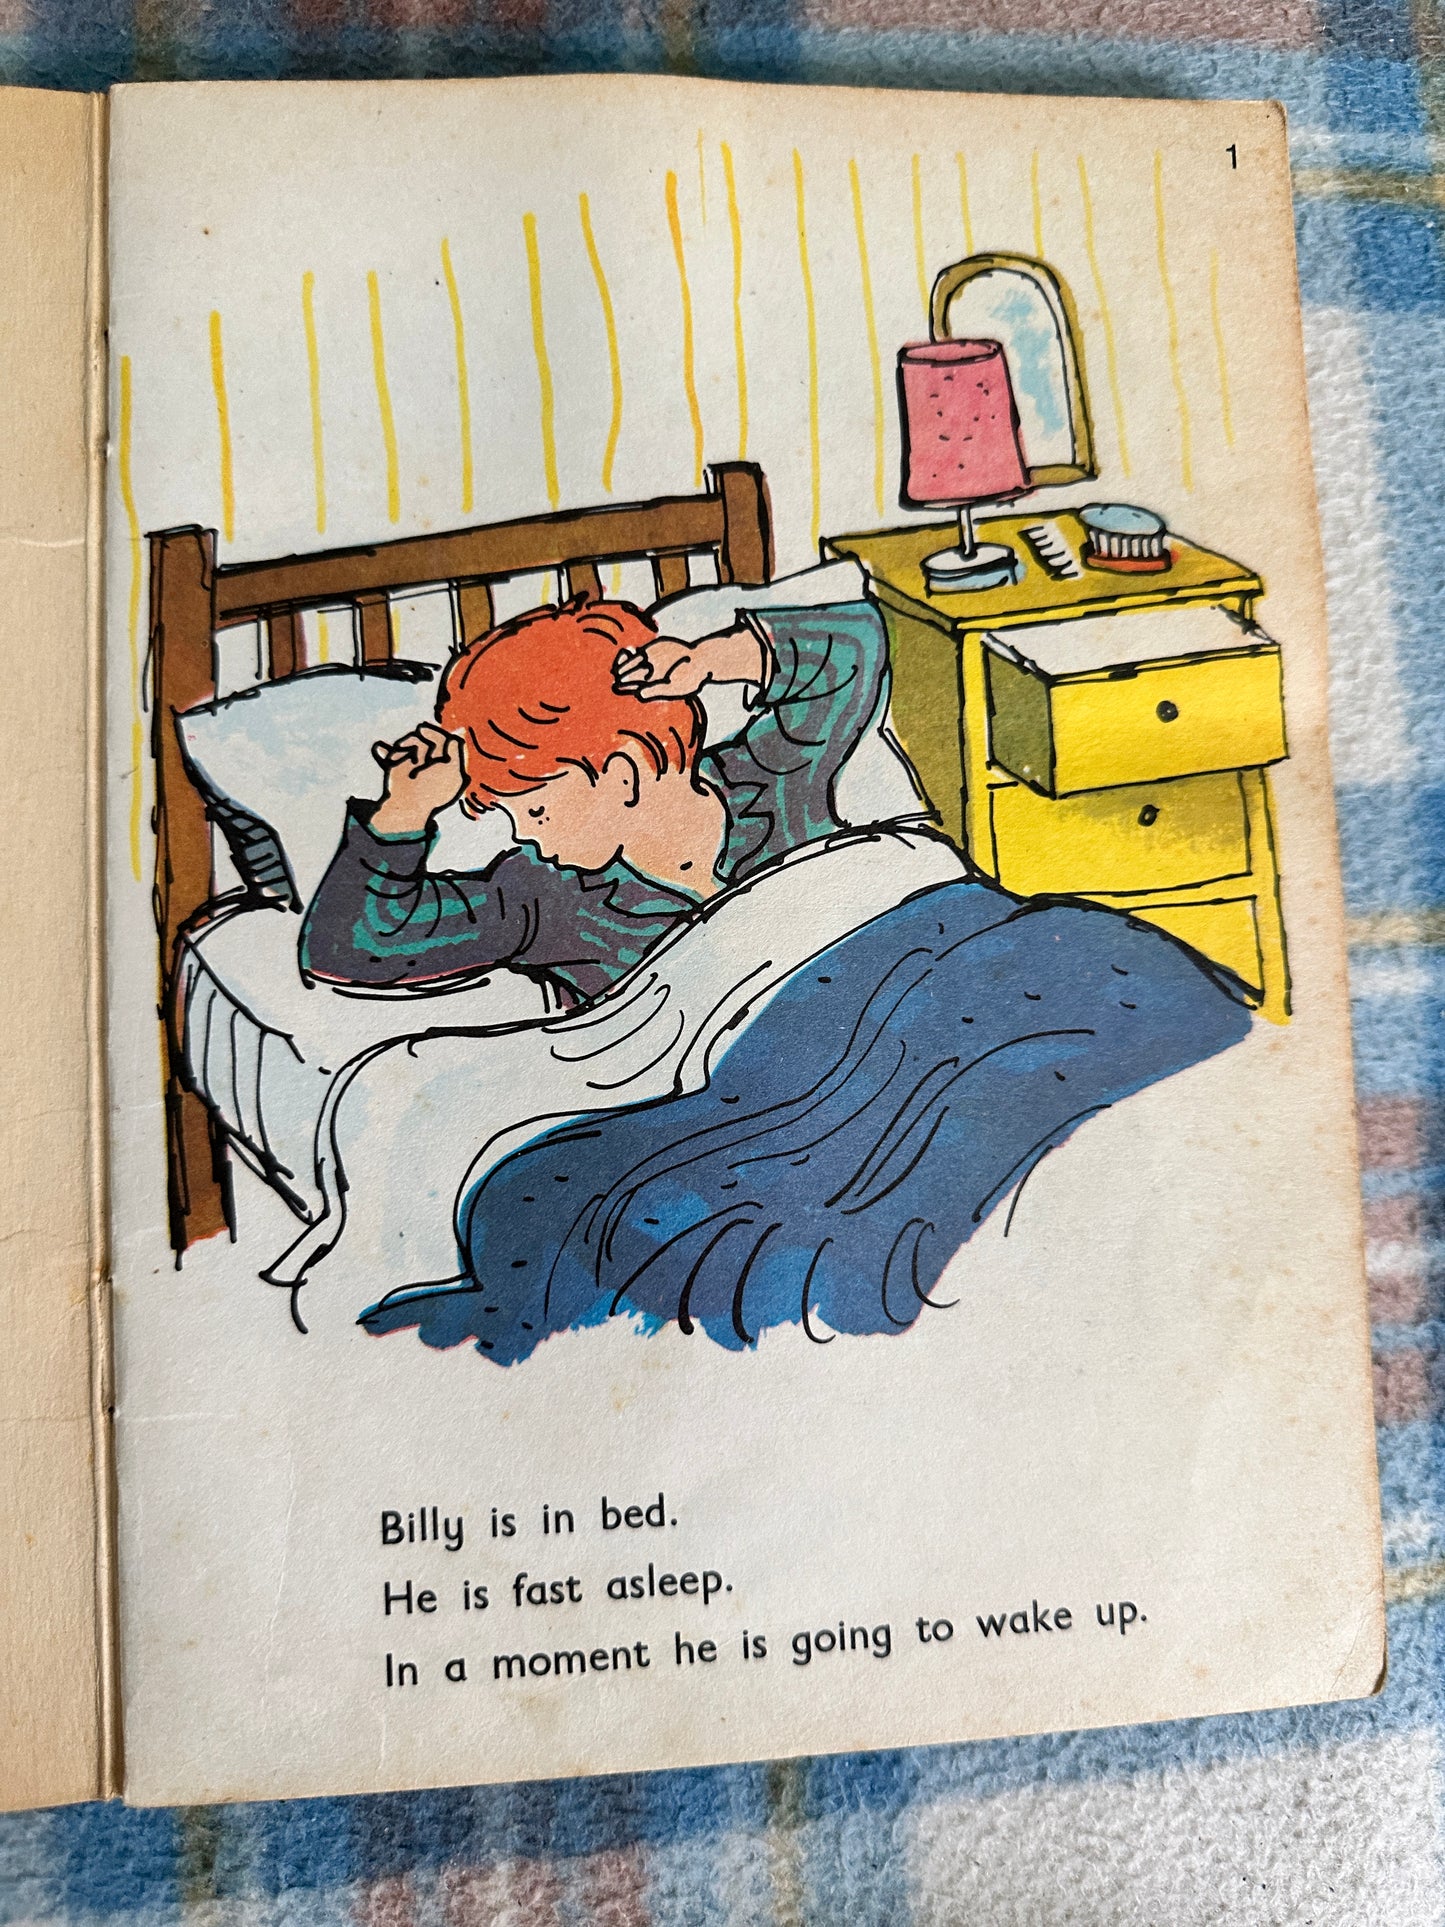 1972 Silly Billy(Blue Book 4) Ruth Ainsworth & Ronald Ridout(Bancroft )